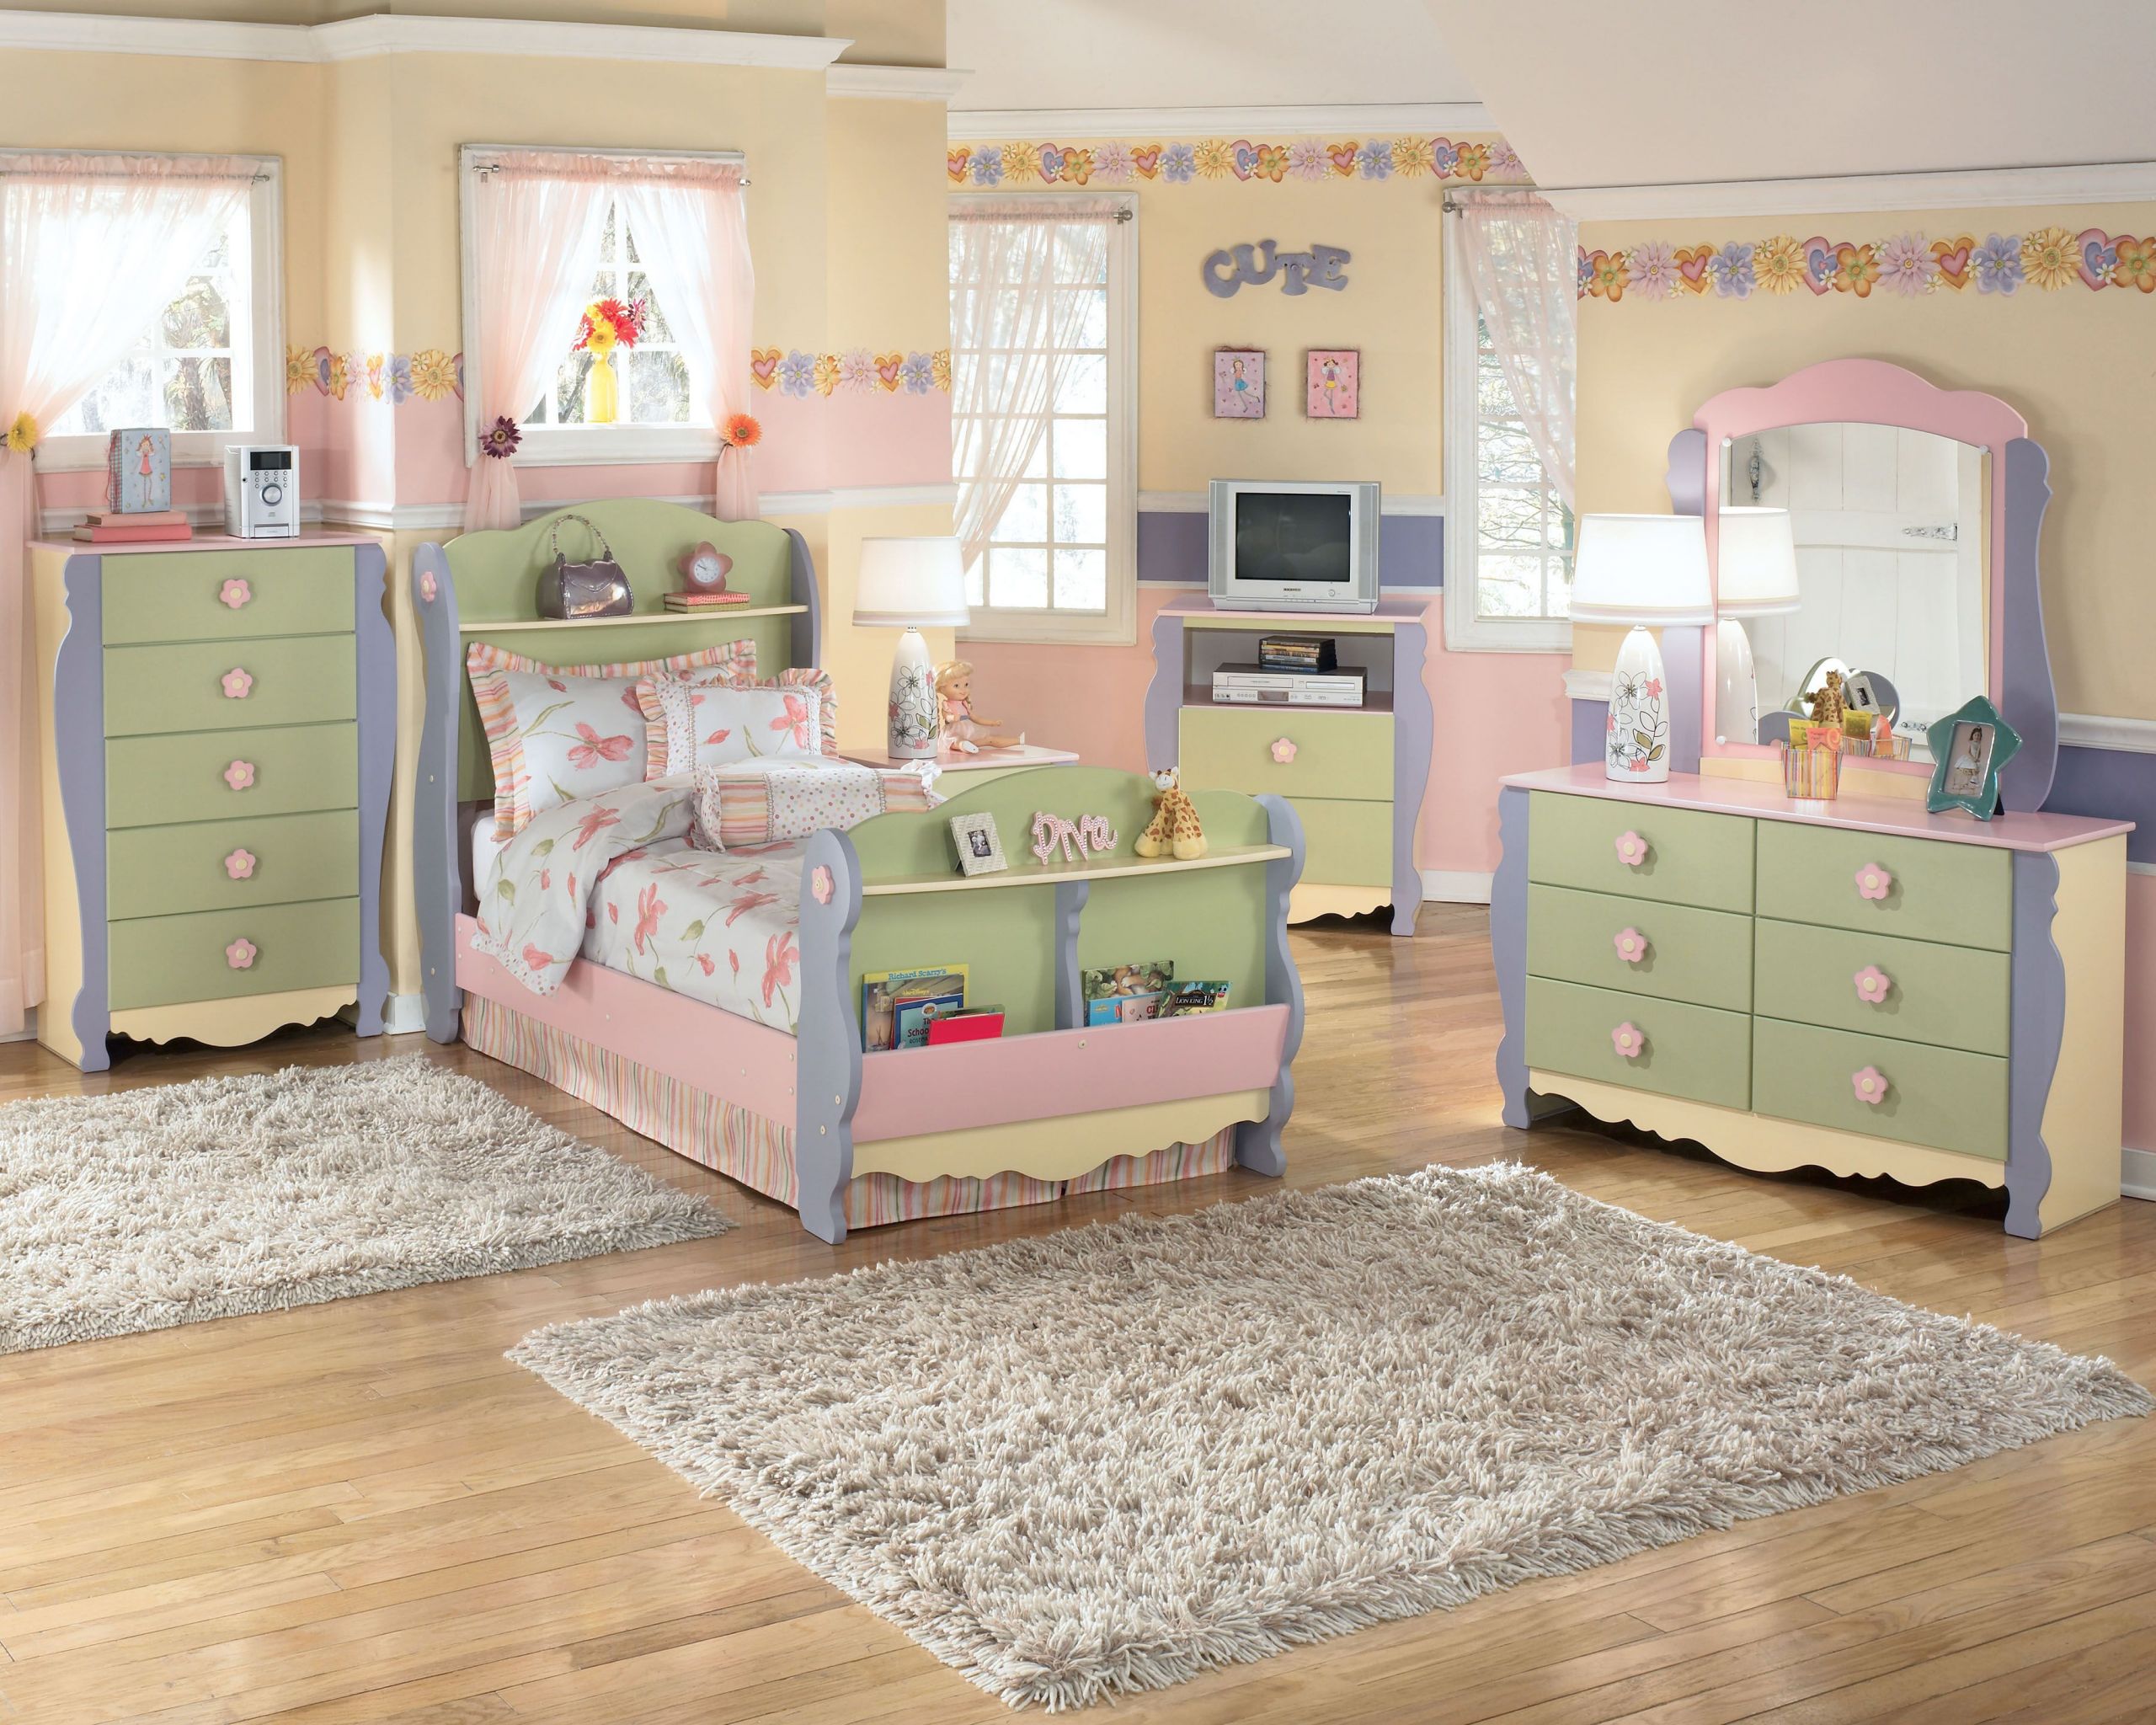 Girls Bedroom Sets Furniture
 Such a sweet Ashley Furniture HomeStore bedroom for a